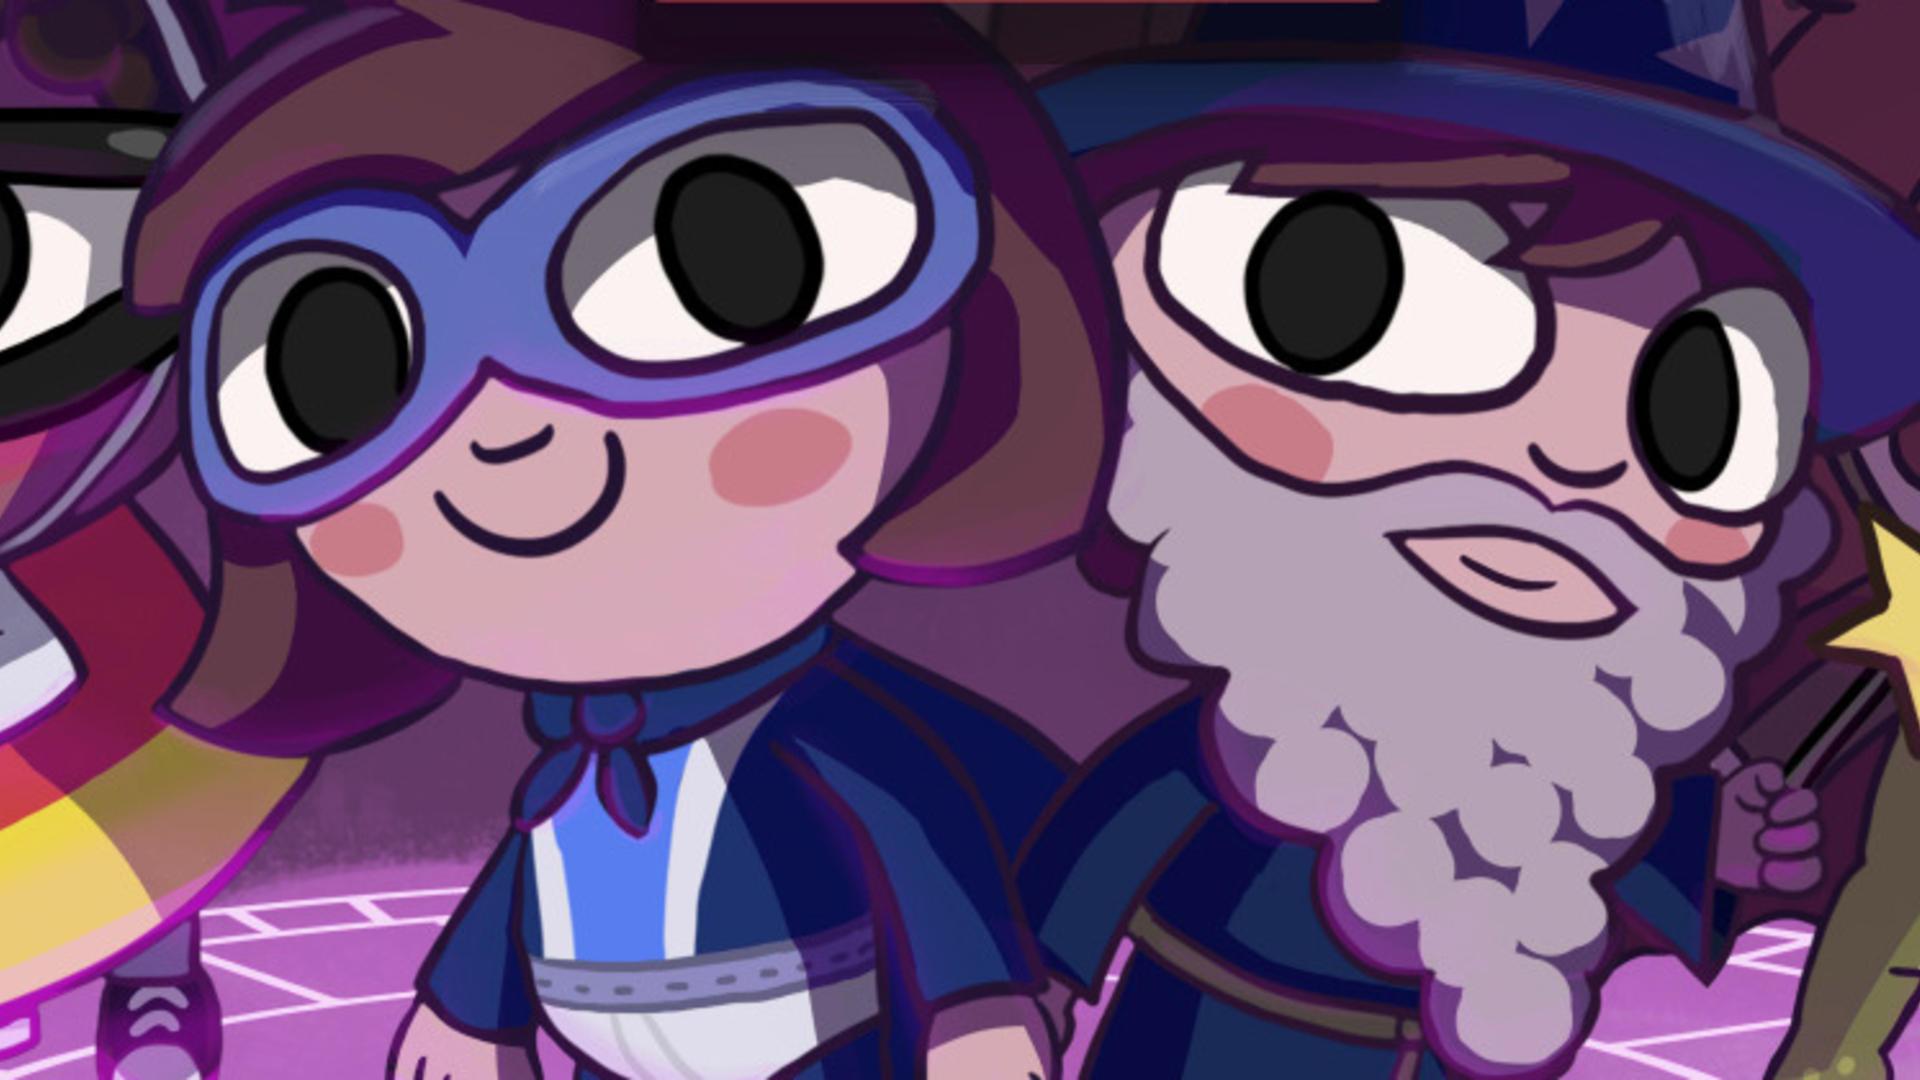 Costume Quest 2 PC Review: The Halloween Time Machine